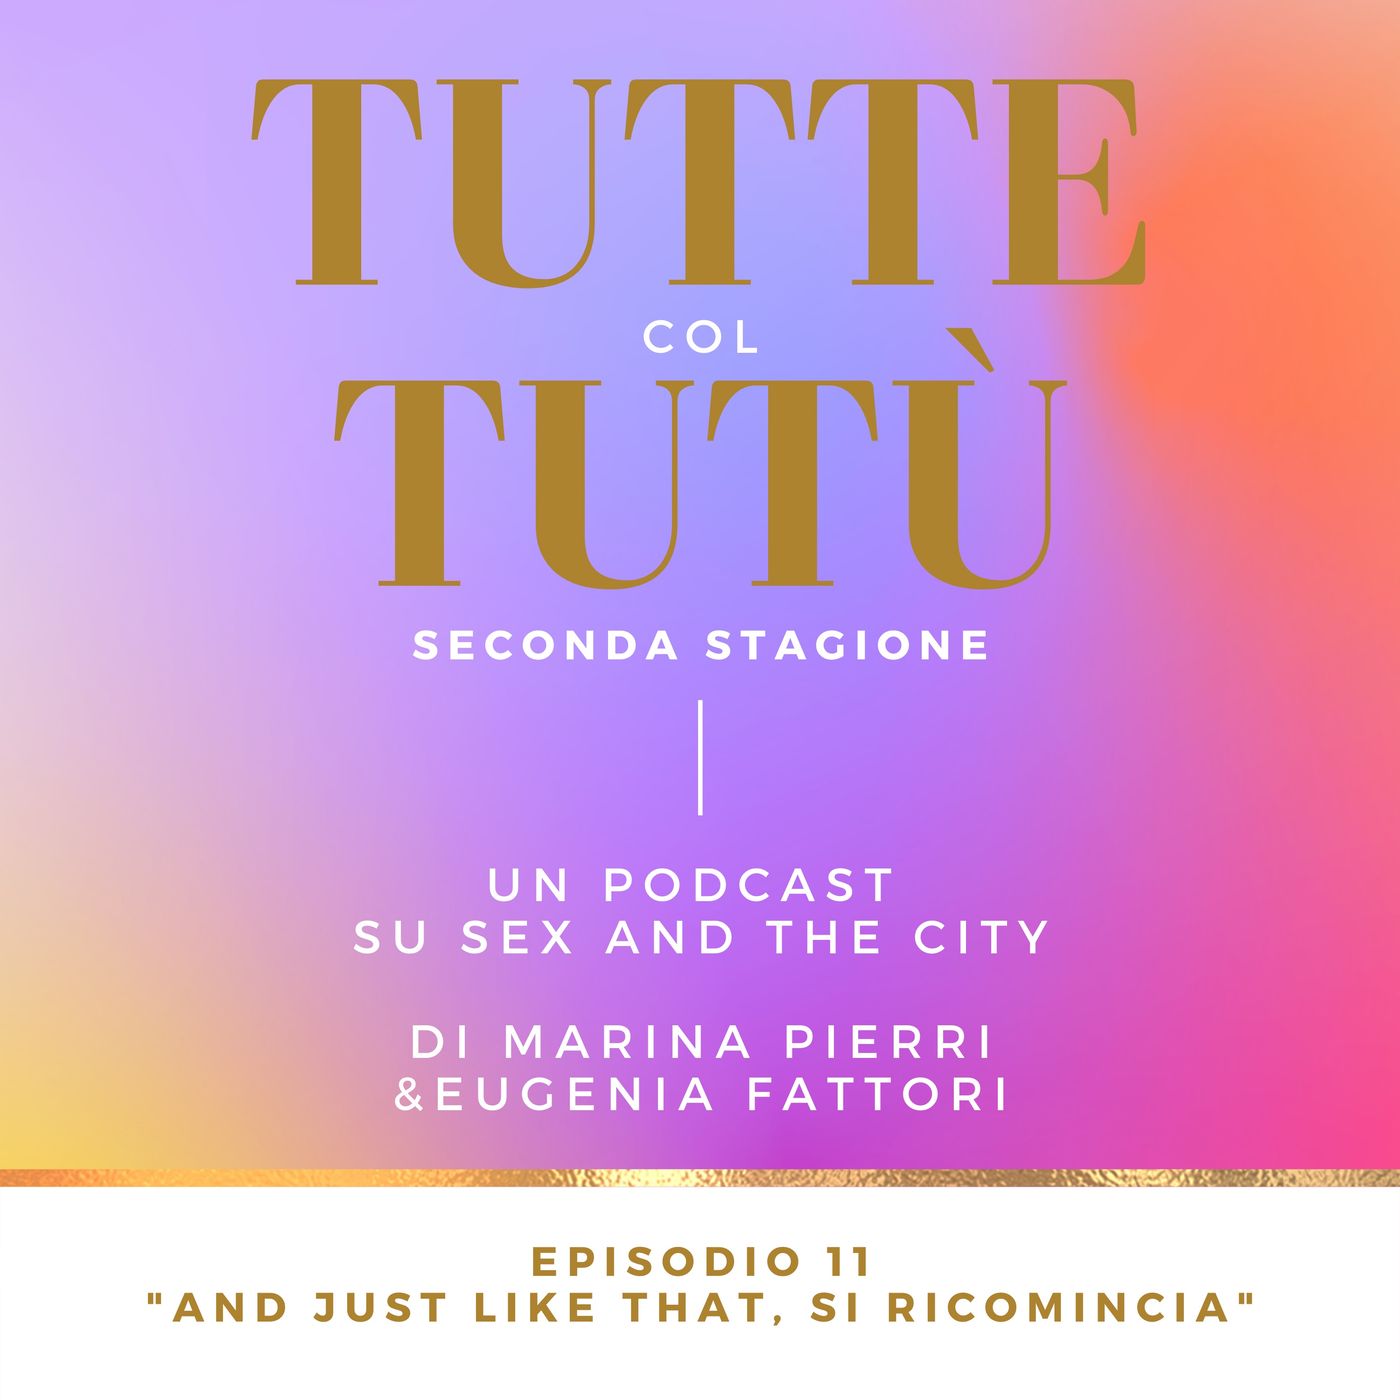 Episodio 11: And Just Like That, si ricomincia!